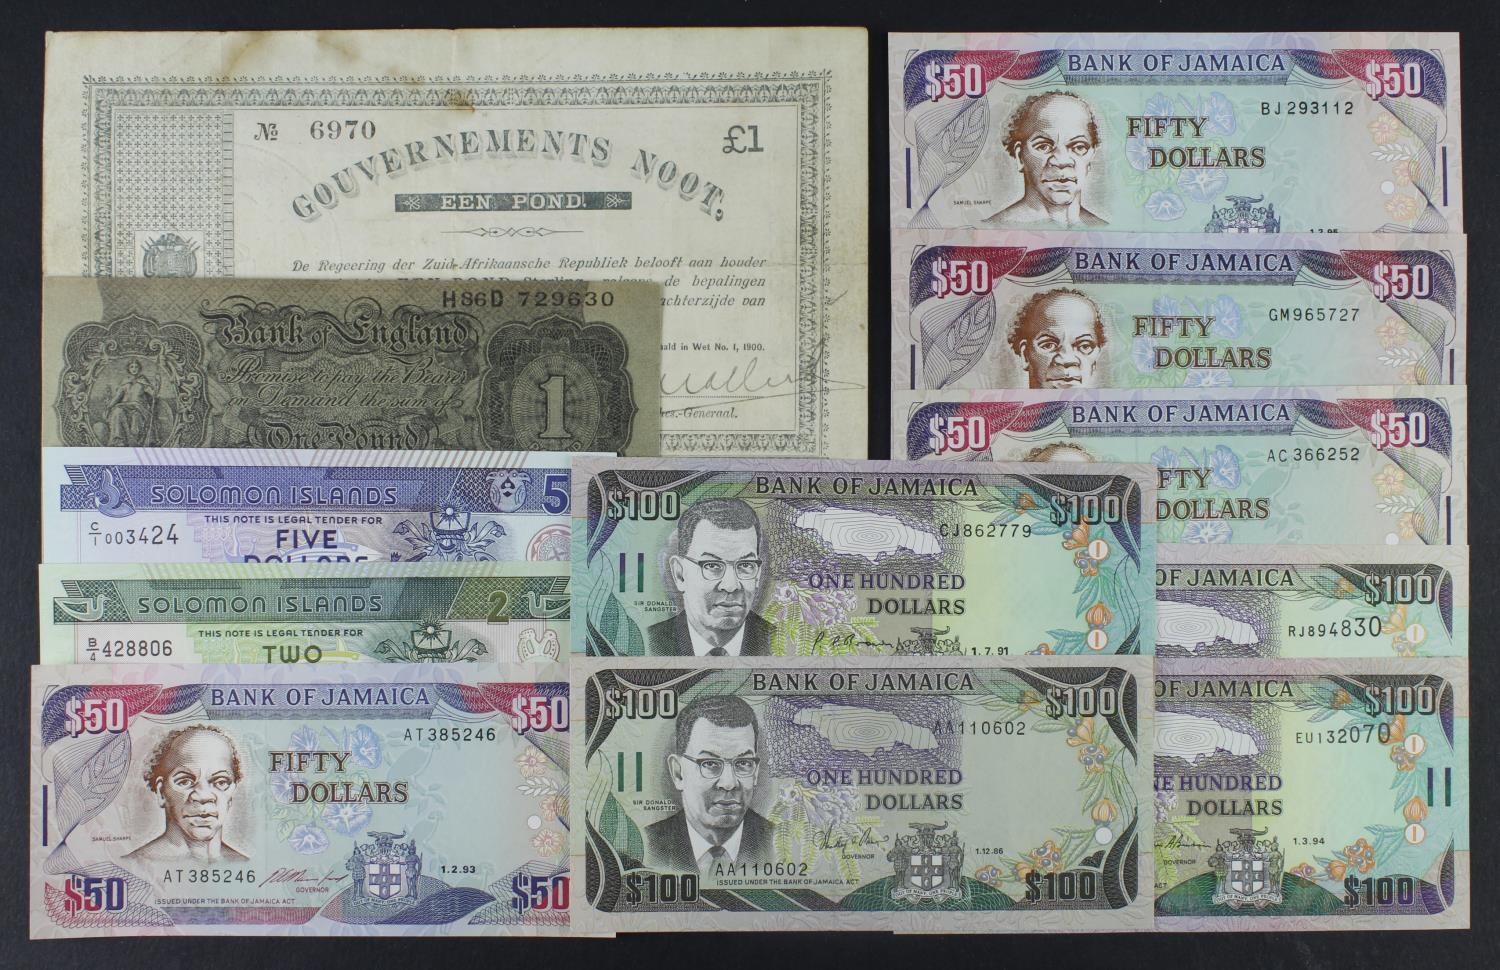 World (12), South Africa 1 Pound Gouvernment Noot dated 1900, Jamaica 100 Dollars (4) dated 1986,